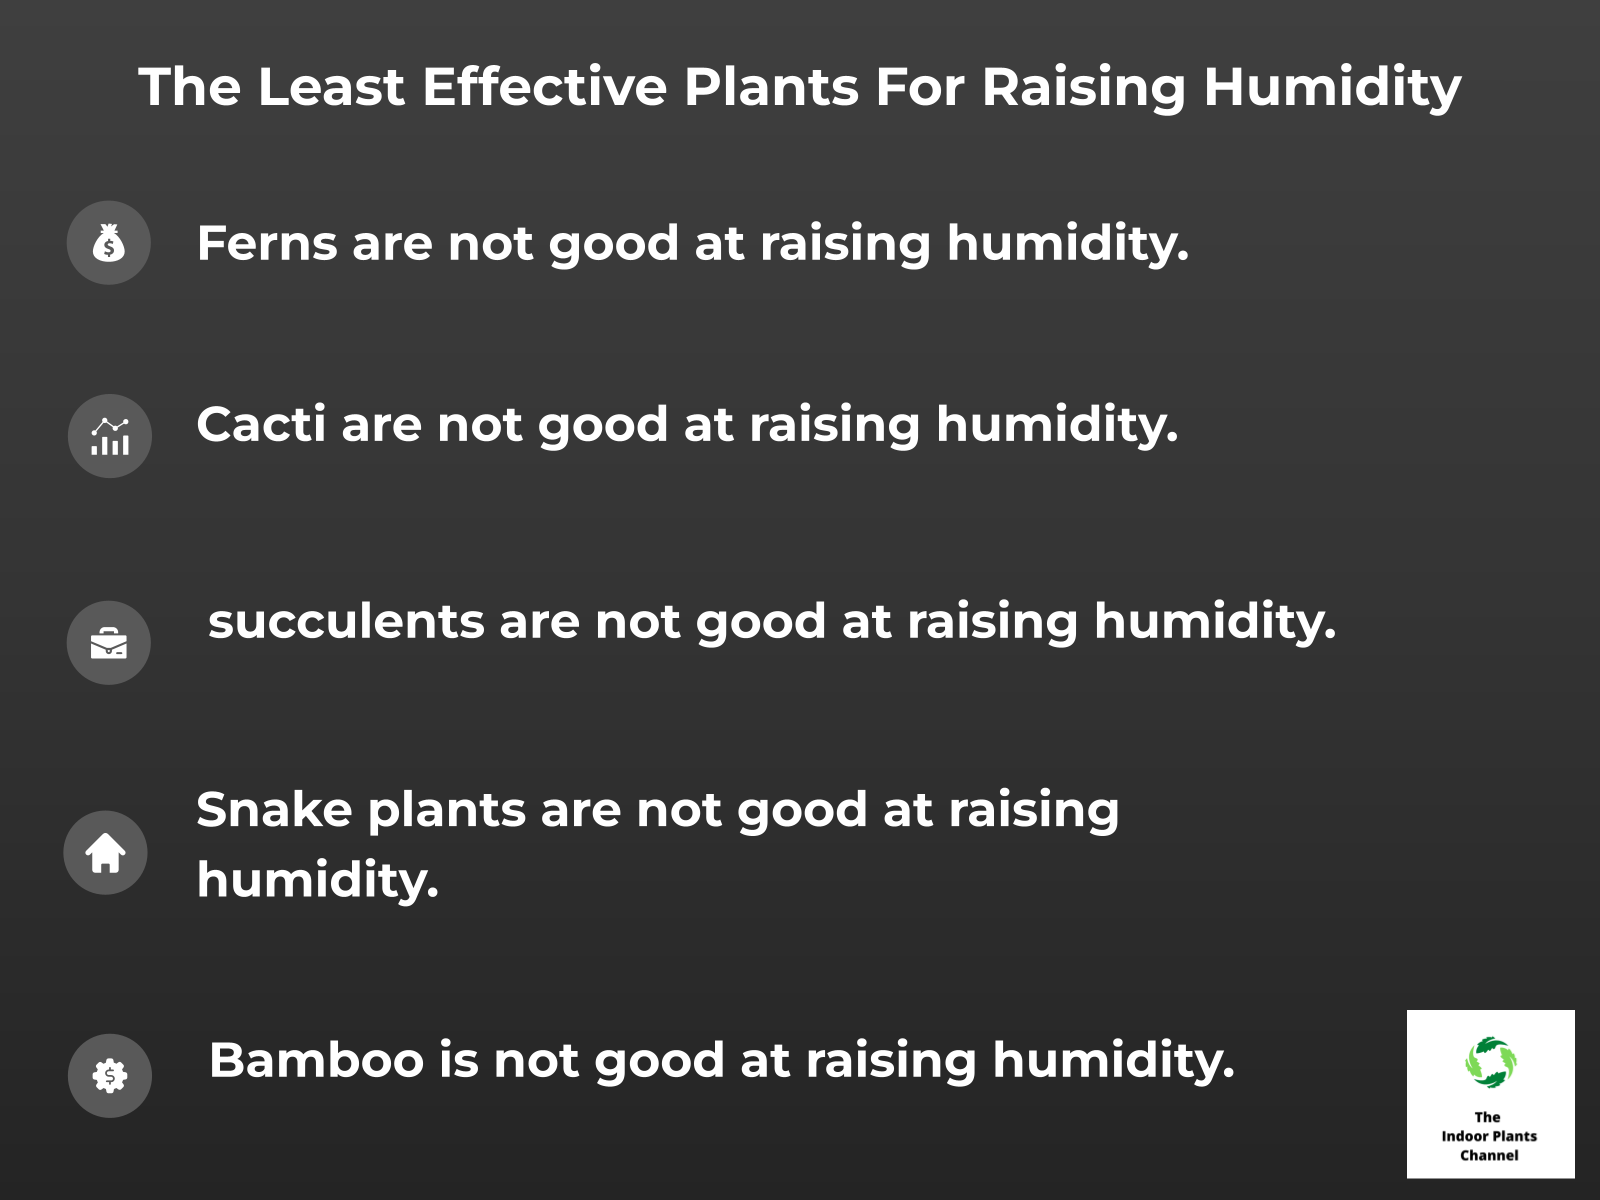 INFOGRAPHIC: The Least Effective Plants for Raising Humidity